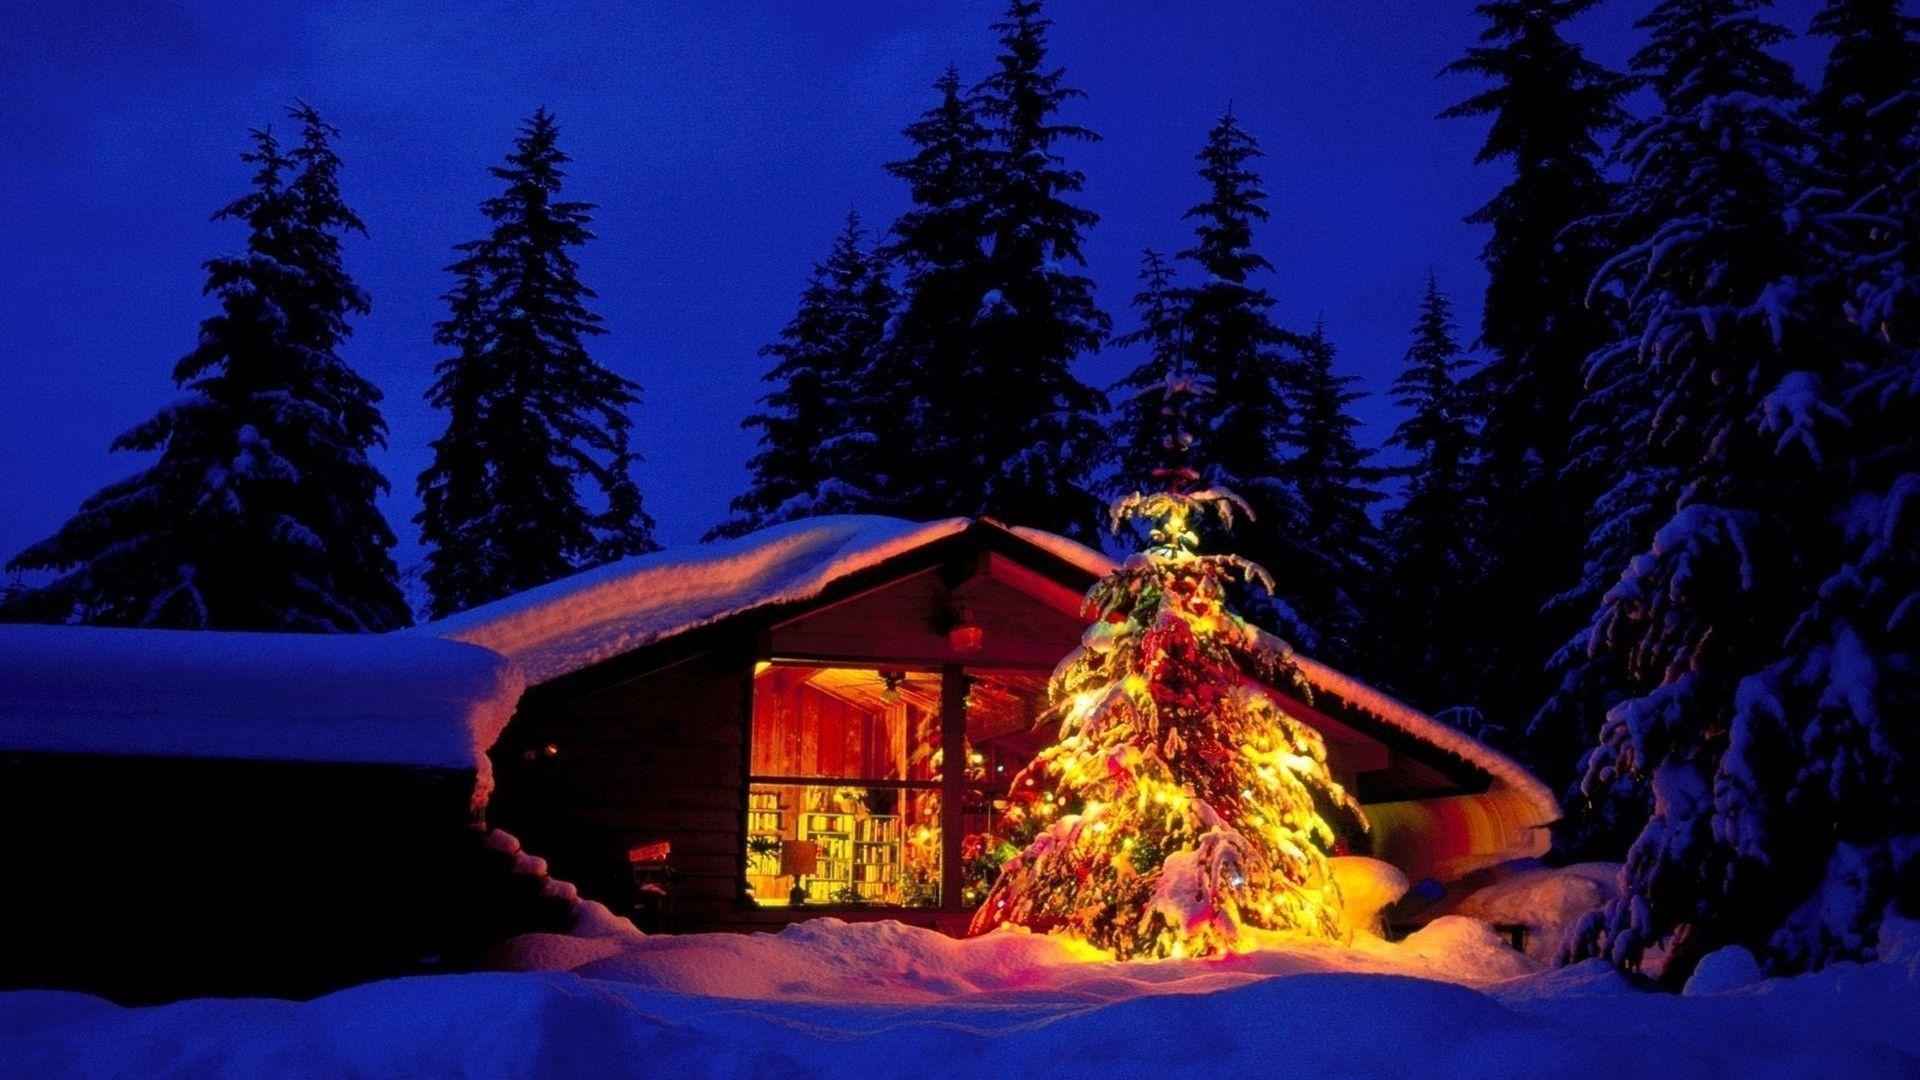 Winter Christmas Wallpapers Hd Wallpapers 1920x1080PX ~ Christmas